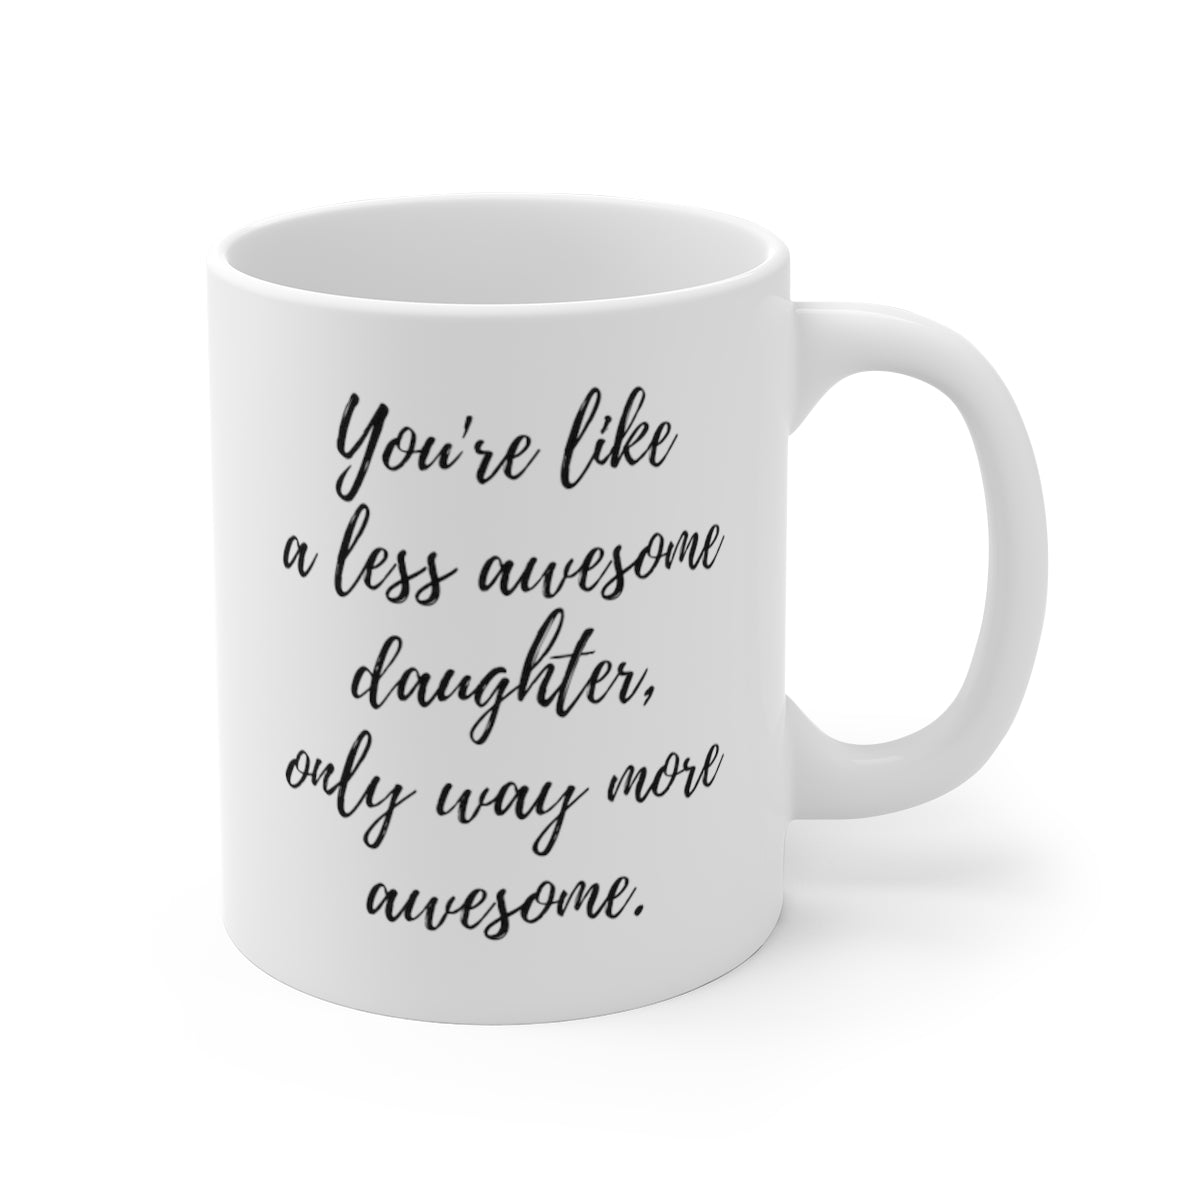 You're Like A Less Awesome Daughter, Only Way More Awesome | Funny, Snarky Gift | White Ceramic Mug, Script Font